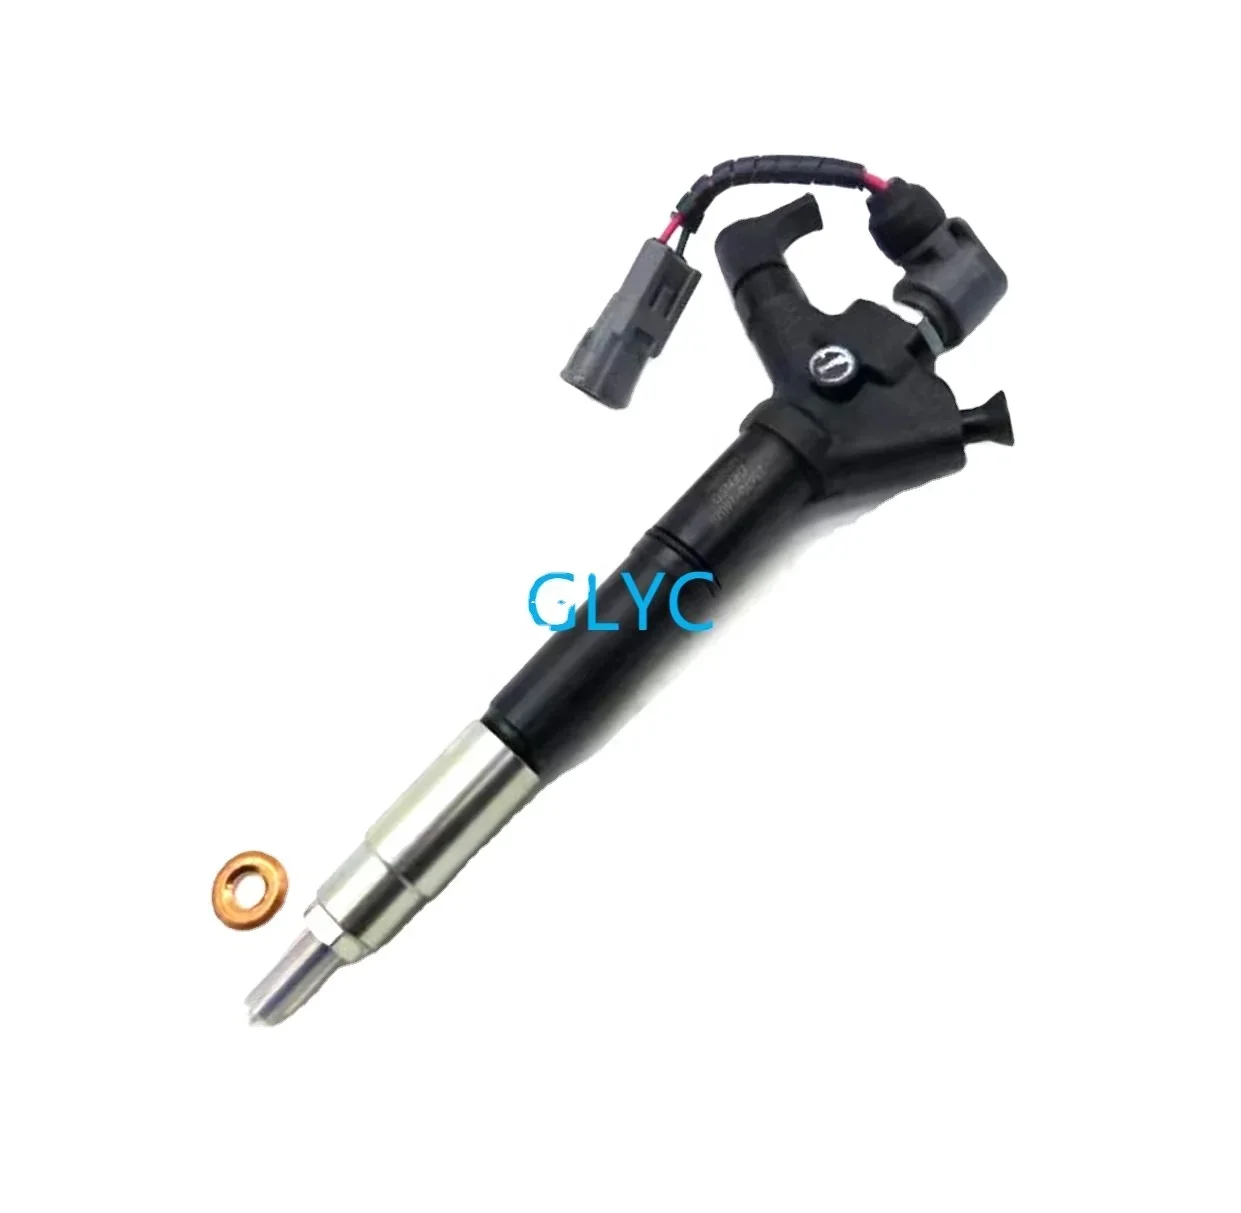 

Genuine Diesel Fuel Injector 23670-29105 23670-26020 23670-26011 295900-0110 For Toyota Corolla Verso 2AD-FHV 2.2L